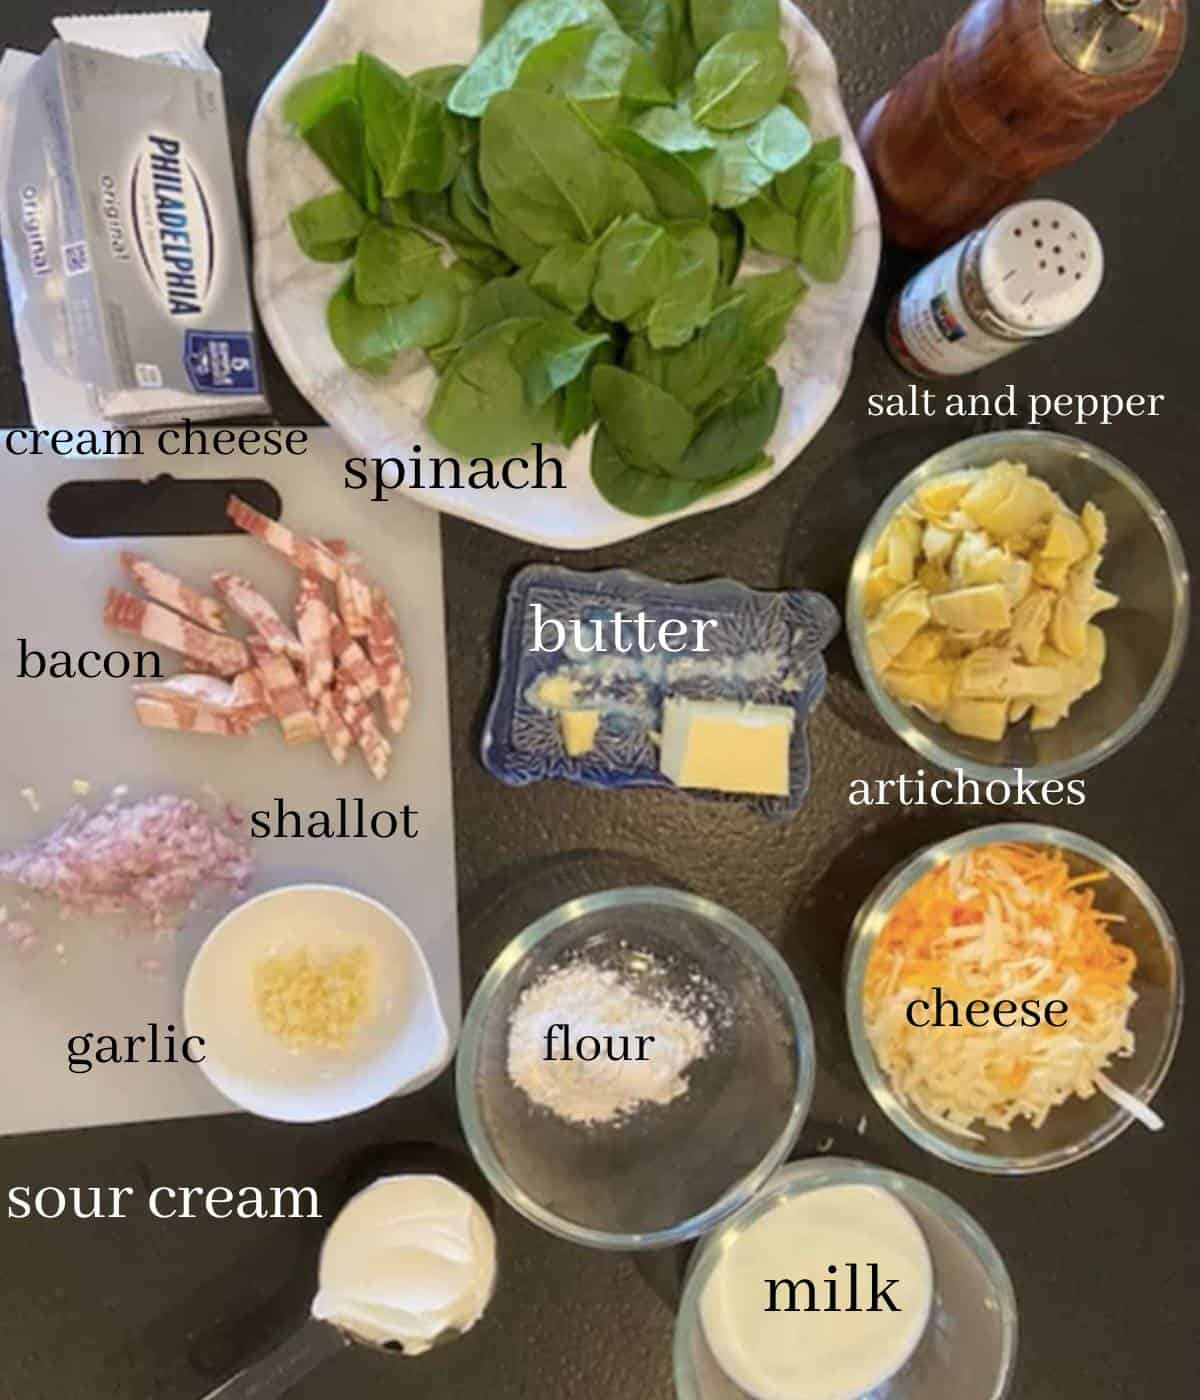 Ingredients for spinach artichoke dip on black countertop. 